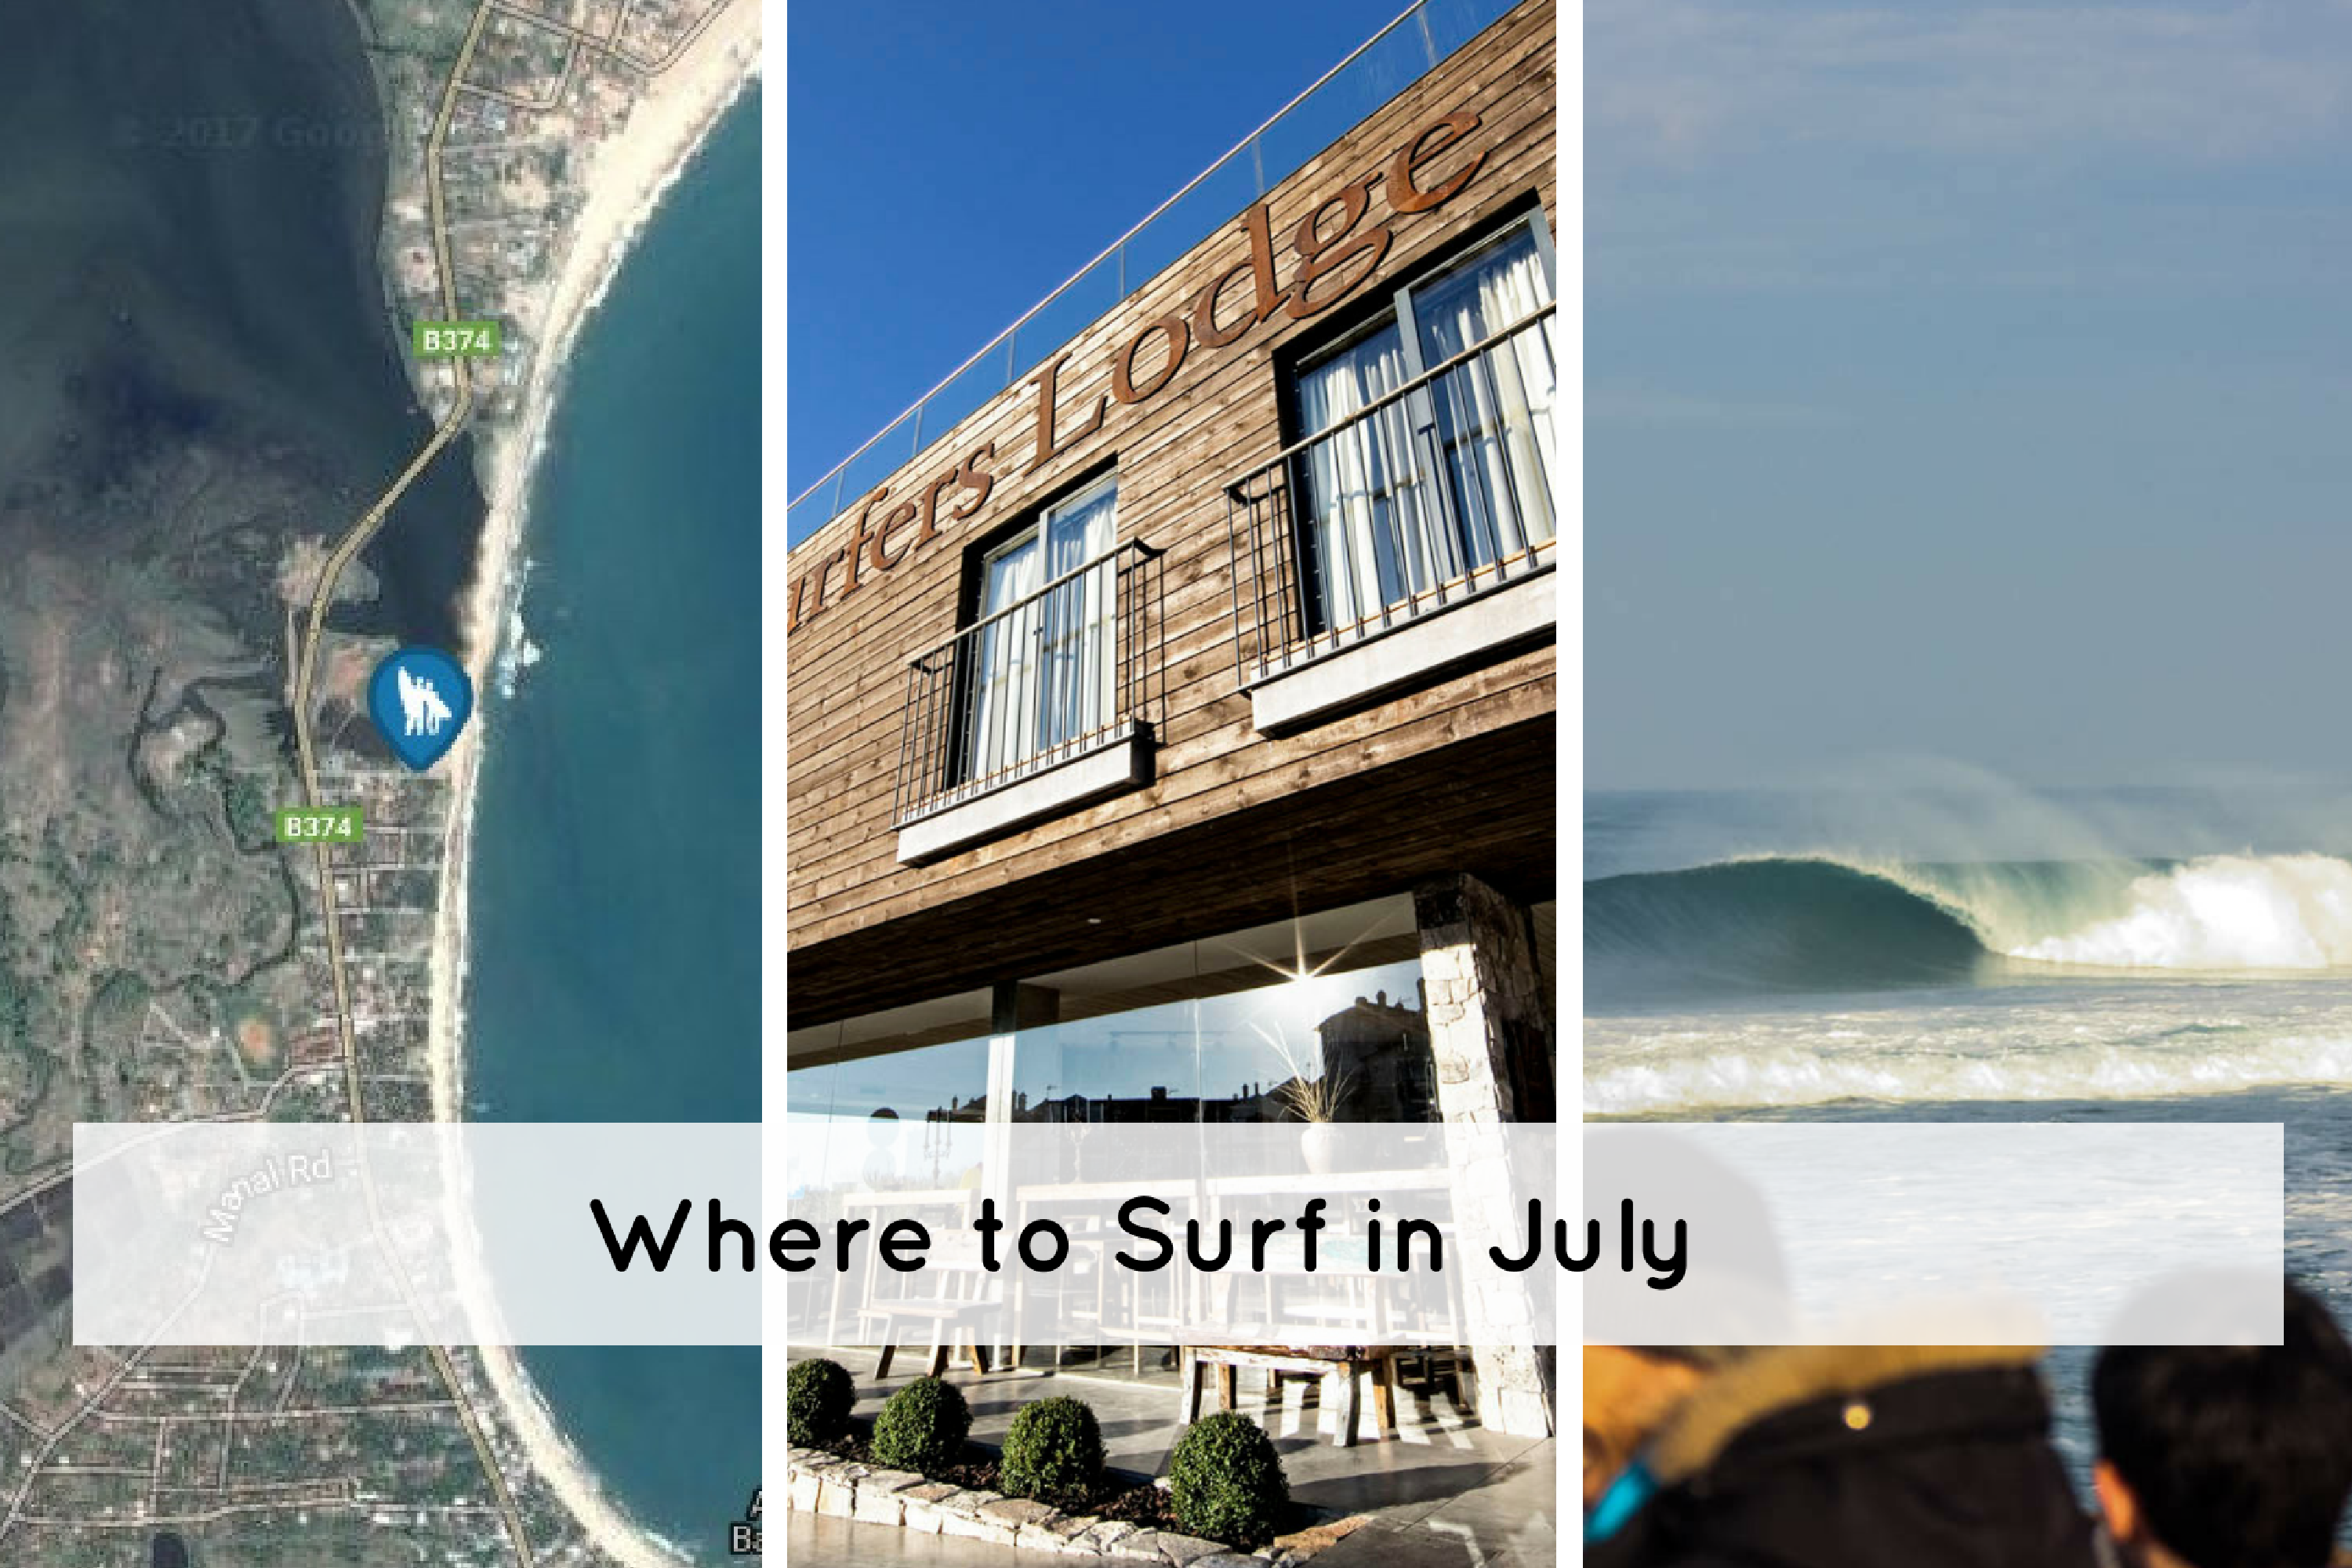 Where to Surf in July